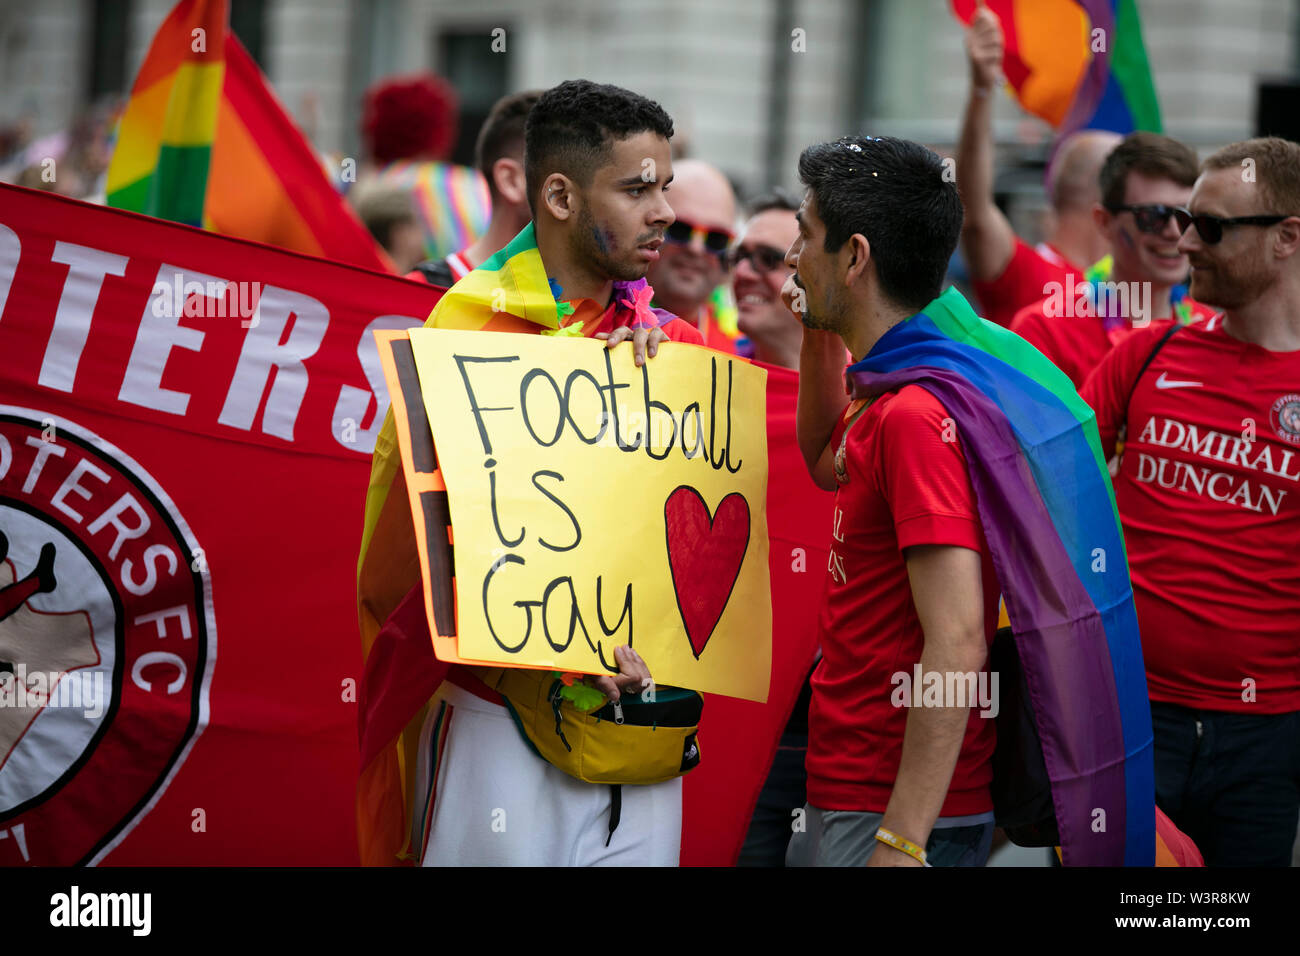 LONDON, UK - July 6th 2019: A man holds a football is gay banner at the annual gay pride march in central London Stock Photo